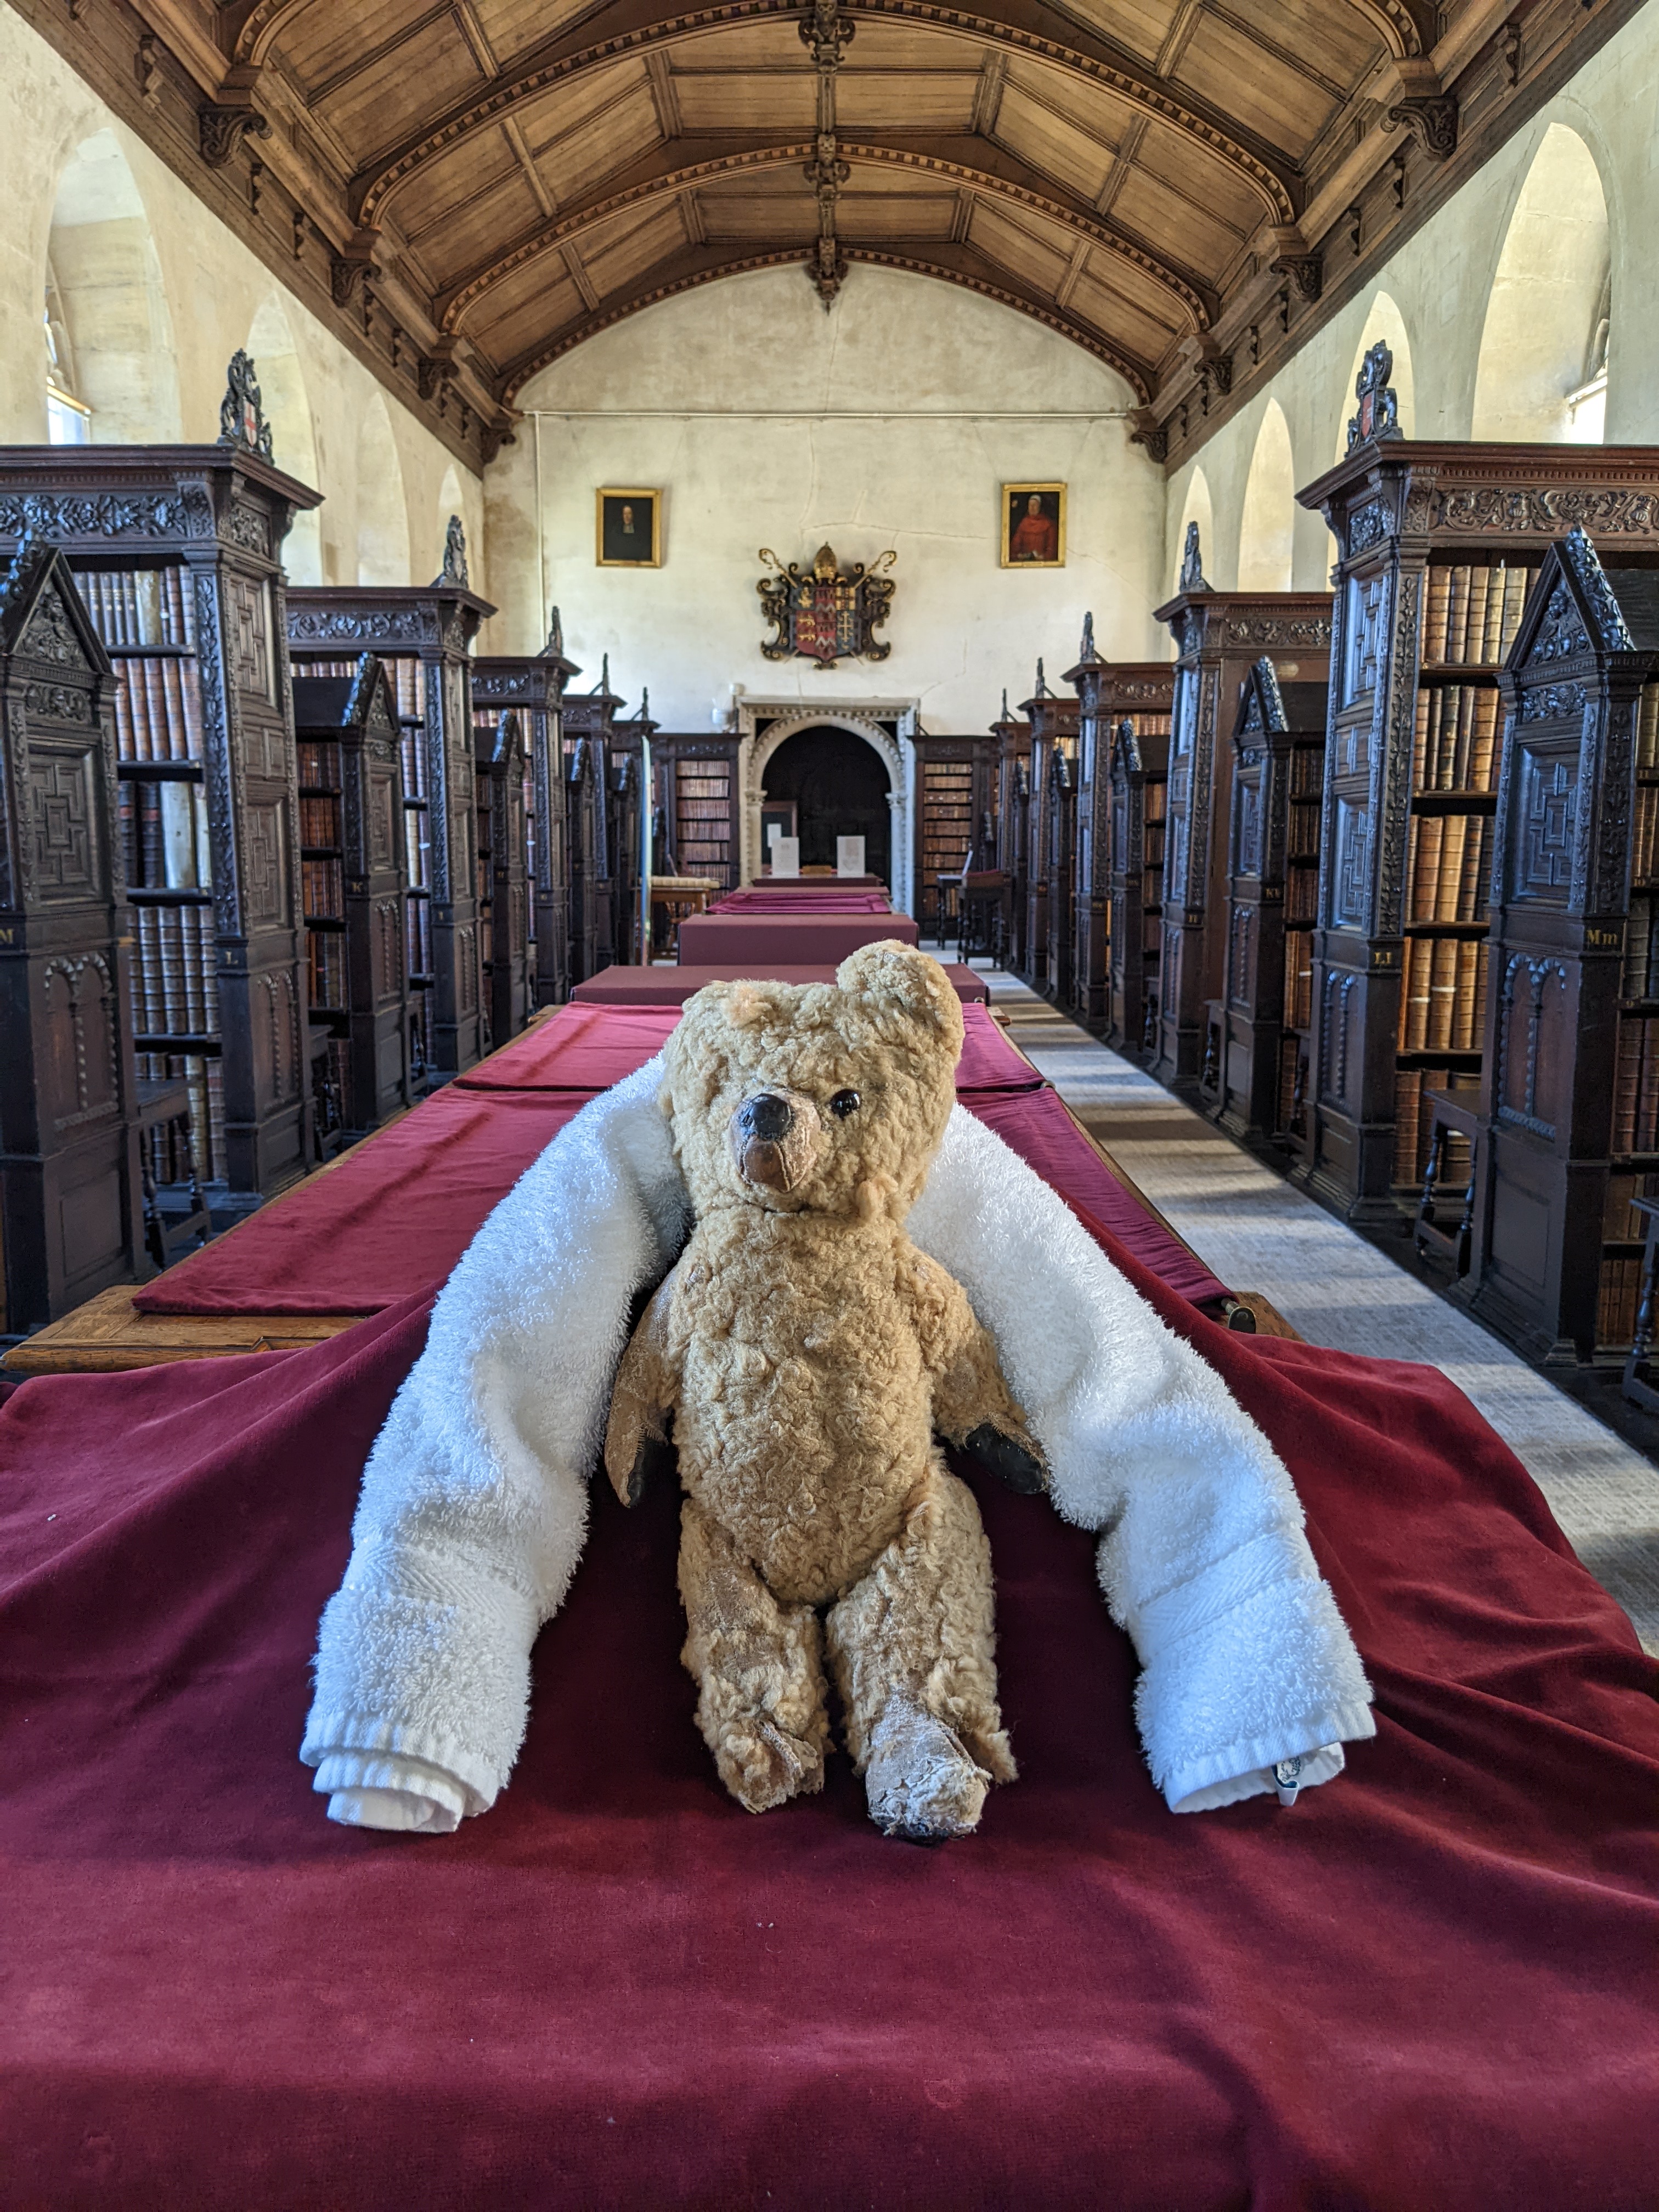 Teddy bear from Douglas Adams's private collection